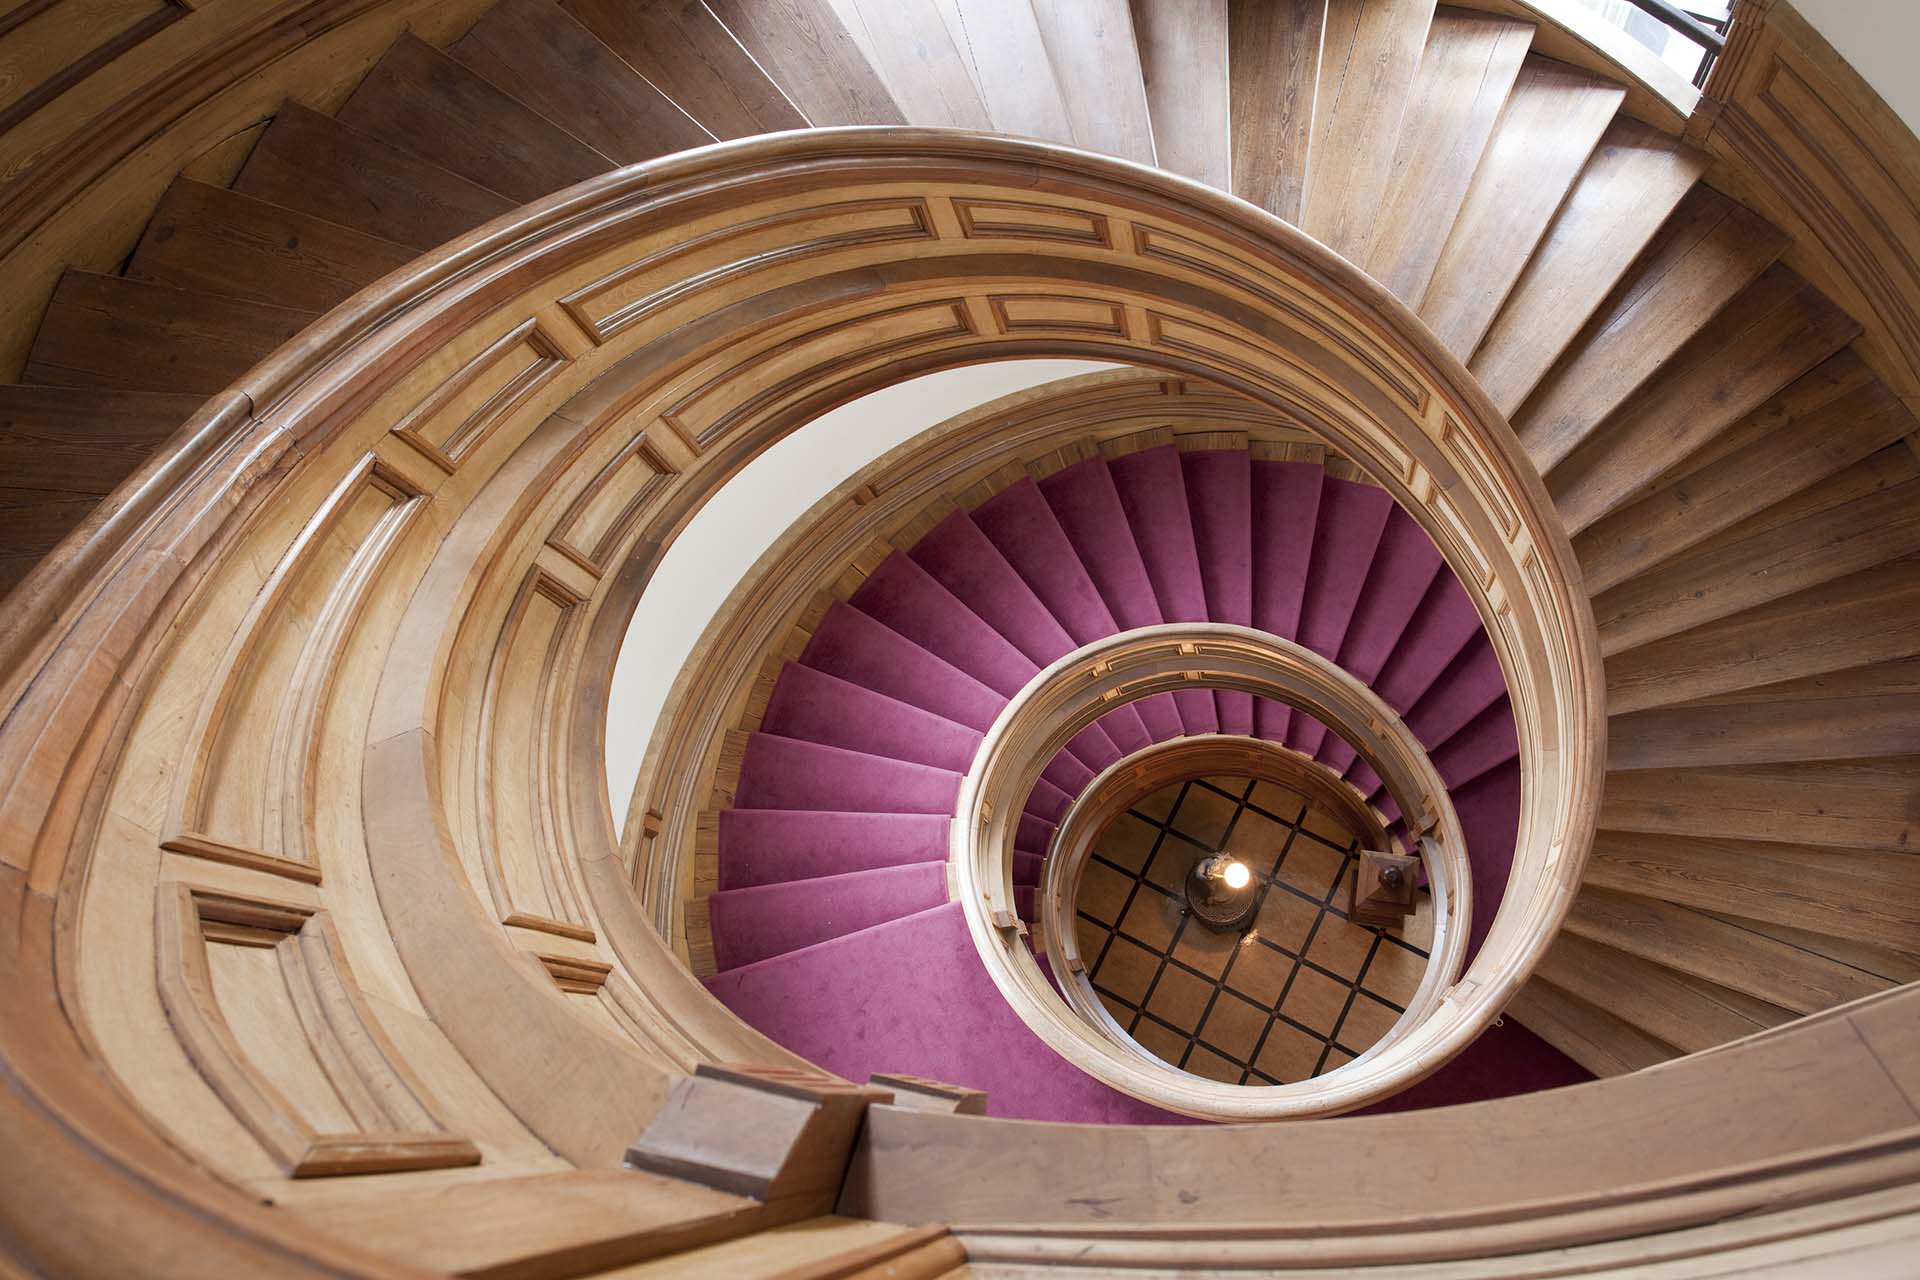 A top-down view of the legislature's spiral staircase.